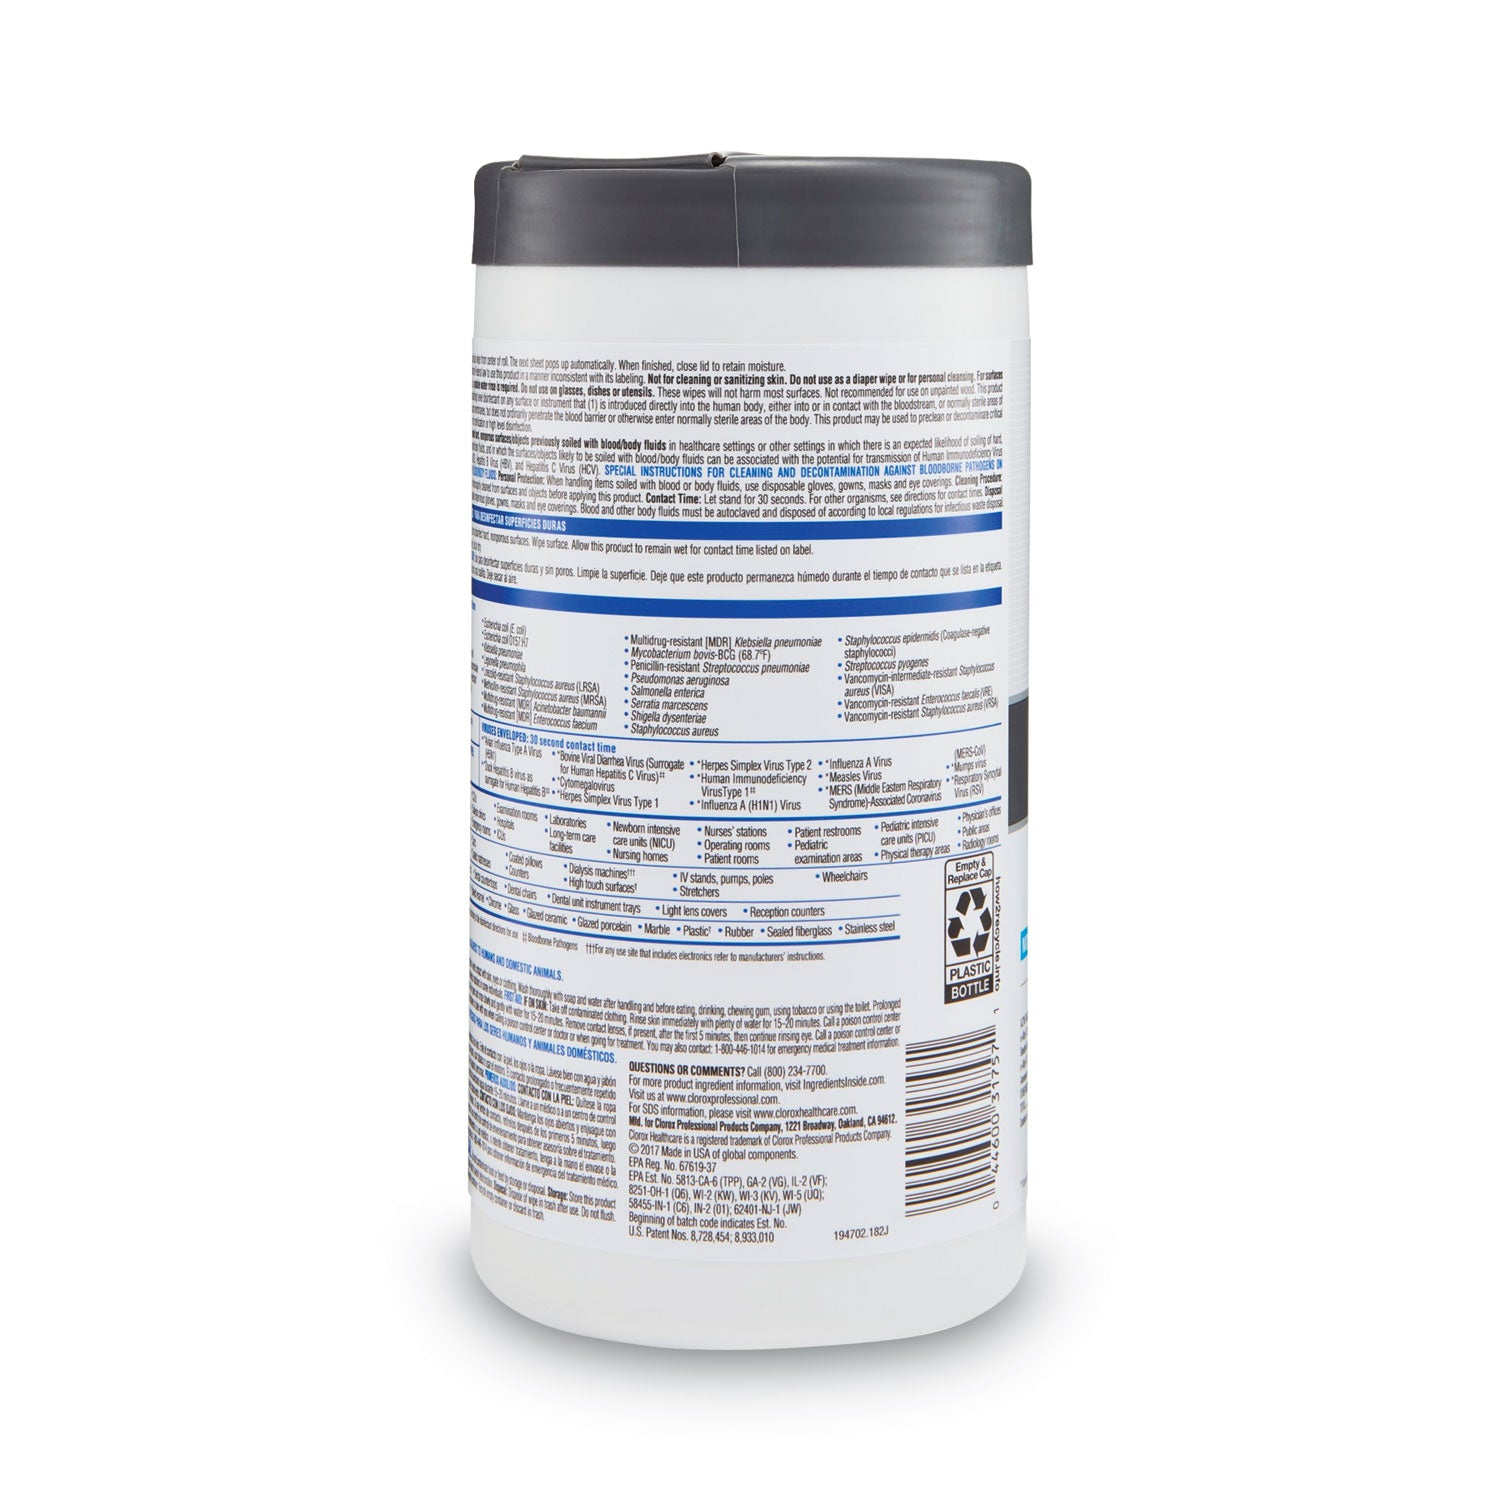 versasure-cleaner-disinfectant-wipes-1-ply-675-x-8-fragranced-white-85-canister-6-canisters-carton_clo31757 - 3